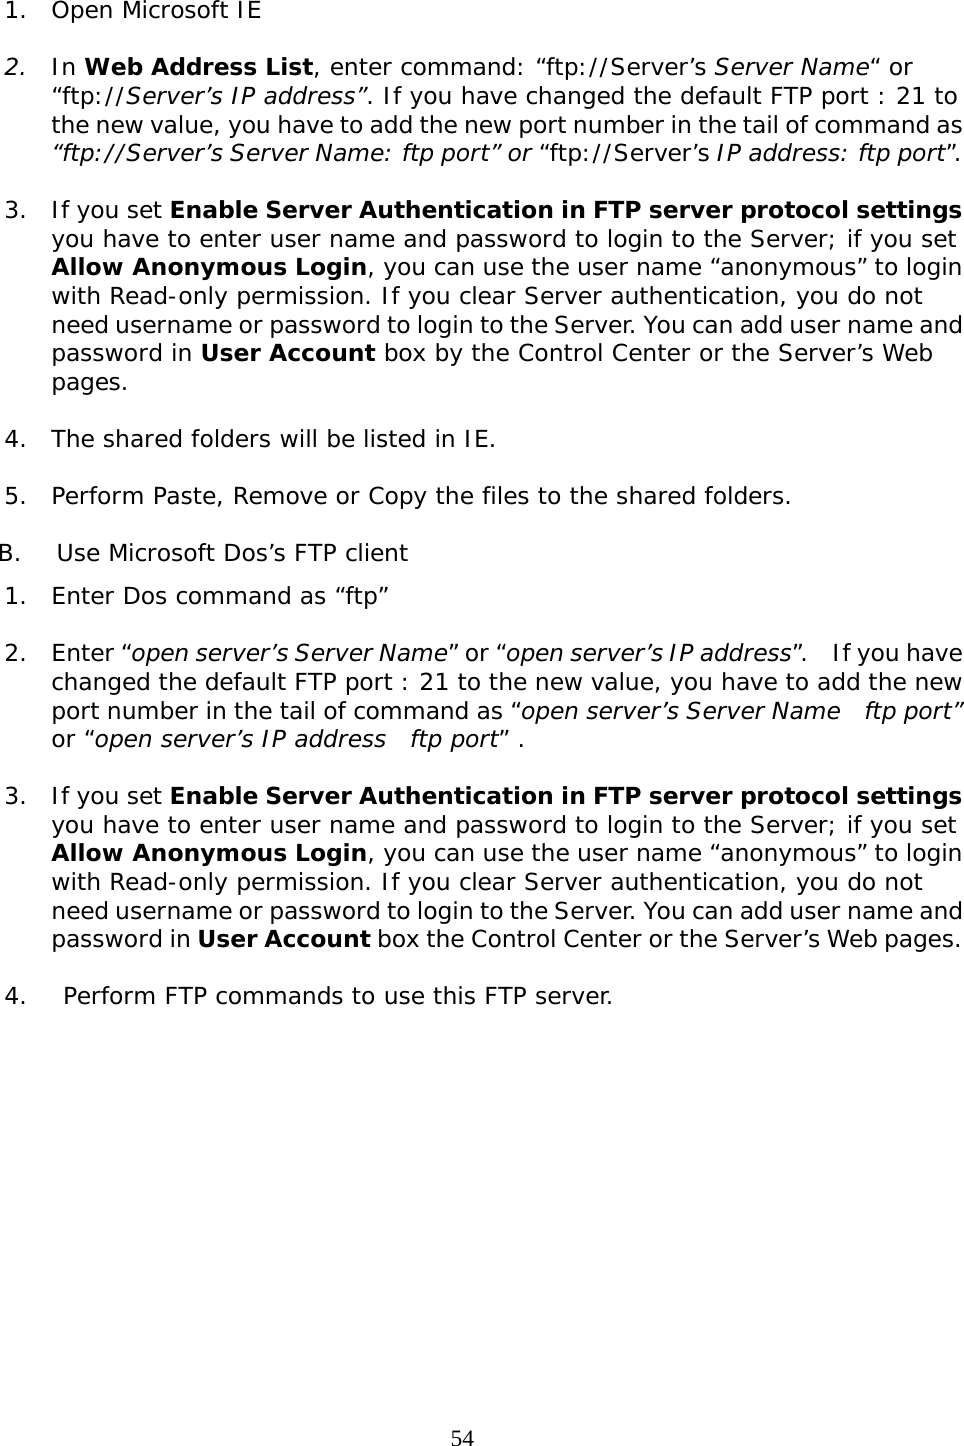     541. Open Microsoft IE   2. In Web Address List, enter command: “ftp://Server’s Server Name“ or “ftp://Server’s IP address”. If you have changed the default FTP port : 21 to the new value, you have to add the new port number in the tail of command as “ftp://Server’s Server Name: ftp port” or “ftp://Server’s IP address: ftp port”.  3. If you set Enable Server Authentication in FTP server protocol settings you have to enter user name and password to login to the Server; if you set Allow Anonymous Login, you can use the user name “anonymous” to login with Read-only permission. If you clear Server authentication, you do not need username or password to login to the Server. You can add user name and password in User Account box by the Control Center or the Server’s Web pages.  4. The shared folders will be listed in IE.  5. Perform Paste, Remove or Copy the files to the shared folders.  B. Use Microsoft Dos’s FTP client 1. Enter Dos command as “ftp”  2. Enter “open server’s Server Name” or “open server’s IP address”.  If you have changed the default FTP port : 21 to the new value, you have to add the new port number in the tail of command as “open server’s Server Name    ftp port” or “open server’s IP address  ftp port” .  3. If you set Enable Server Authentication in FTP server protocol settings you have to enter user name and password to login to the Server; if you set Allow Anonymous Login, you can use the user name “anonymous” to login with Read-only permission. If you clear Server authentication, you do not need username or password to login to the Server. You can add user name and password in User Account box the Control Center or the Server’s Web pages.  4.  Perform FTP commands to use this FTP server. 